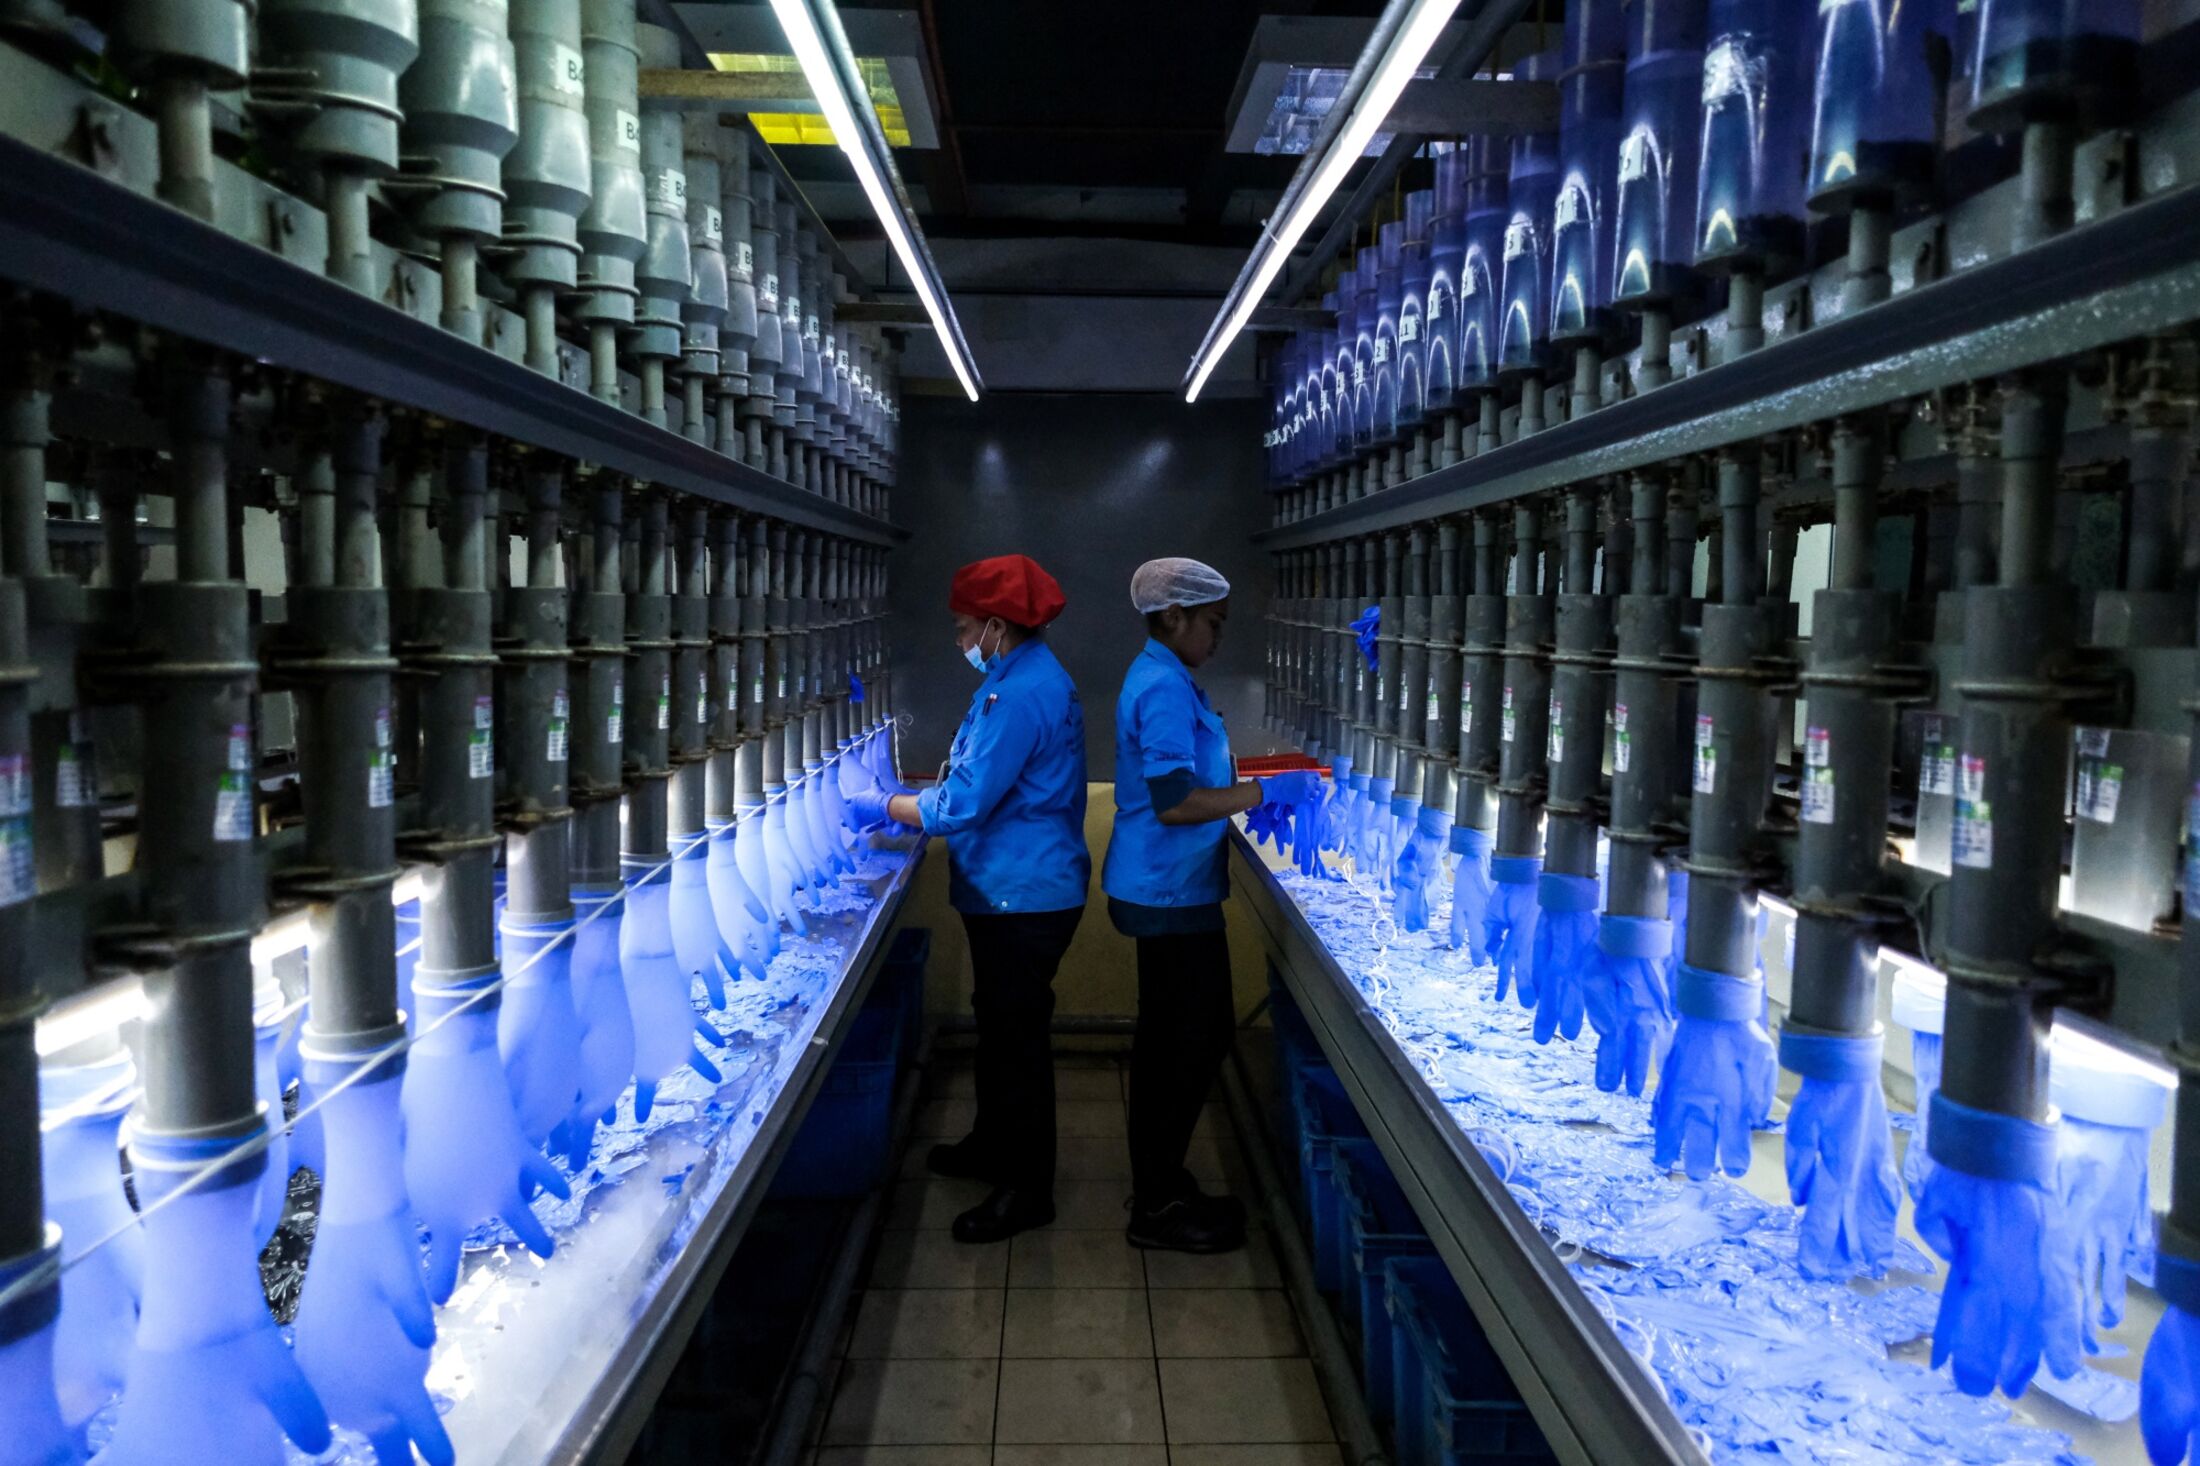 Employees check latex gloves in the watertight test room at a Top Glove Corp. factory in Selangor, Malaysia, on Feb. 18.